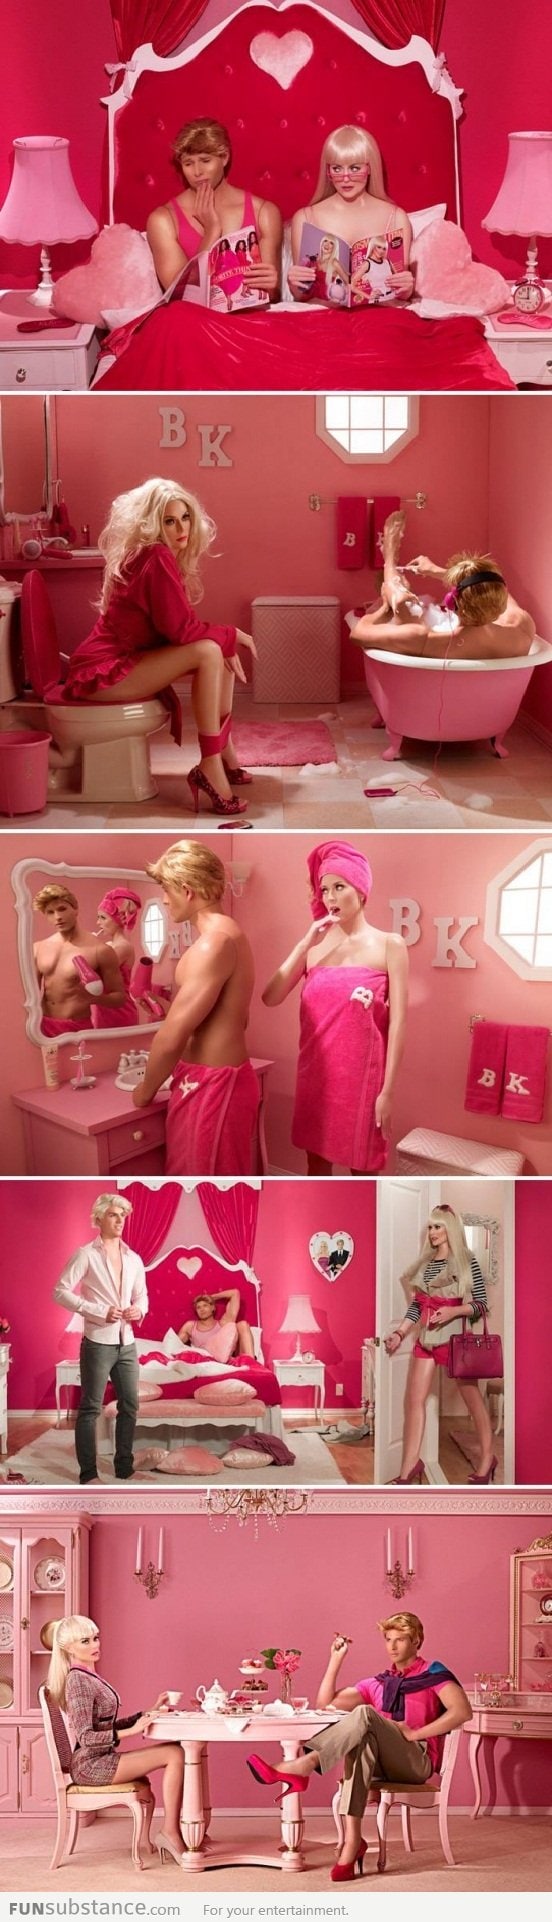 Barbie and Ken's marriage in real life